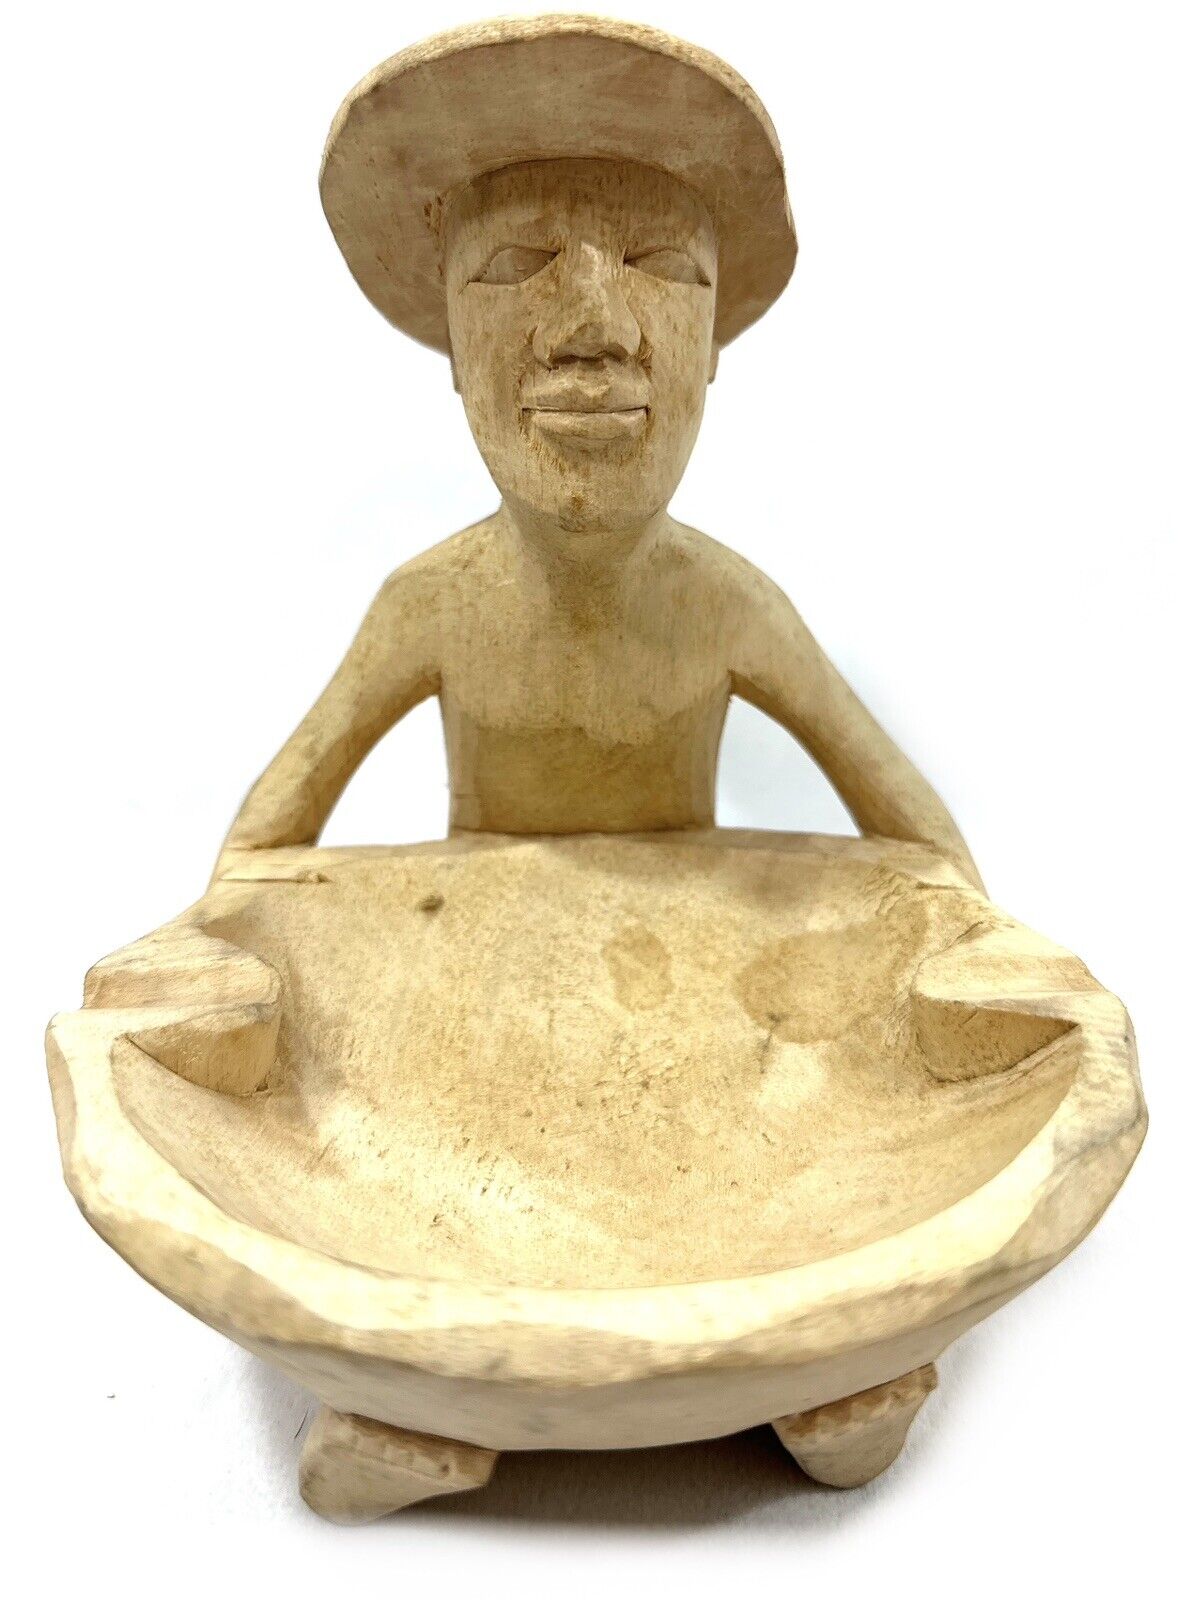 Old Vintage Hand Carved Wooden Ashtray Asian Man Holding Washing Bowl or Ashtray